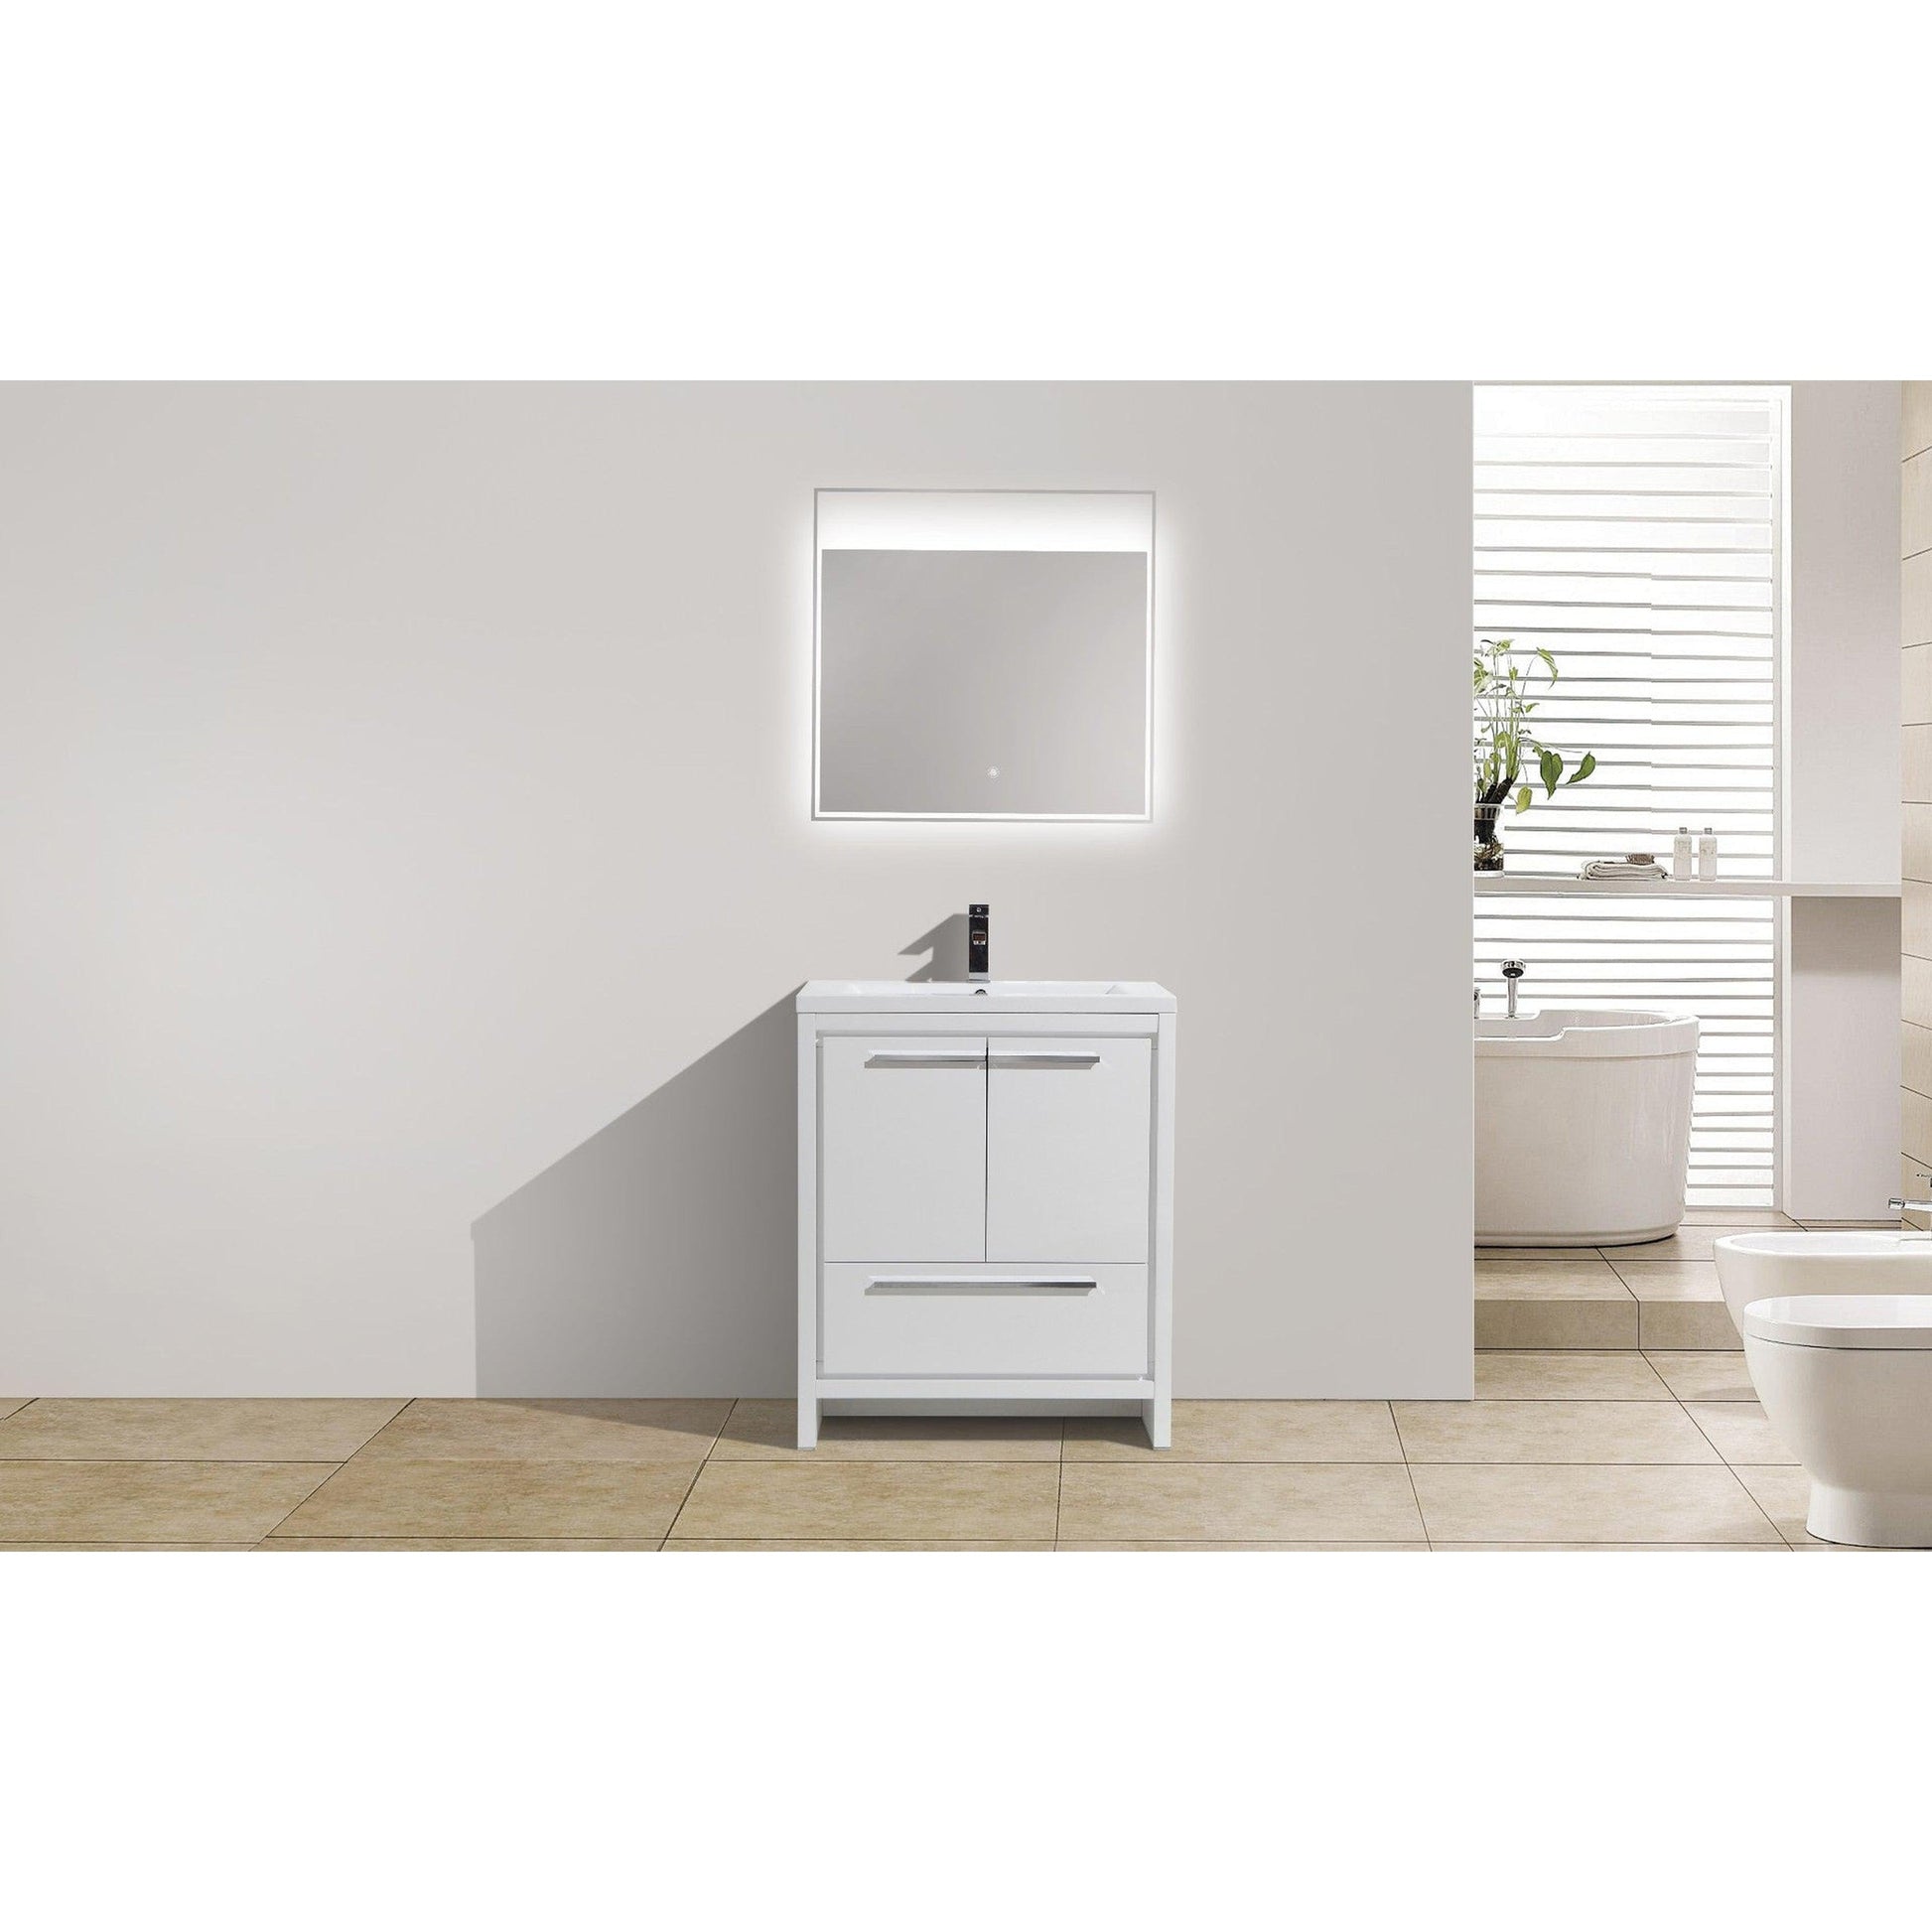 Moreno Bath Dolce 30" High Gloss White Freestanding Vanity With Single Reinforced White Acrylic Sink